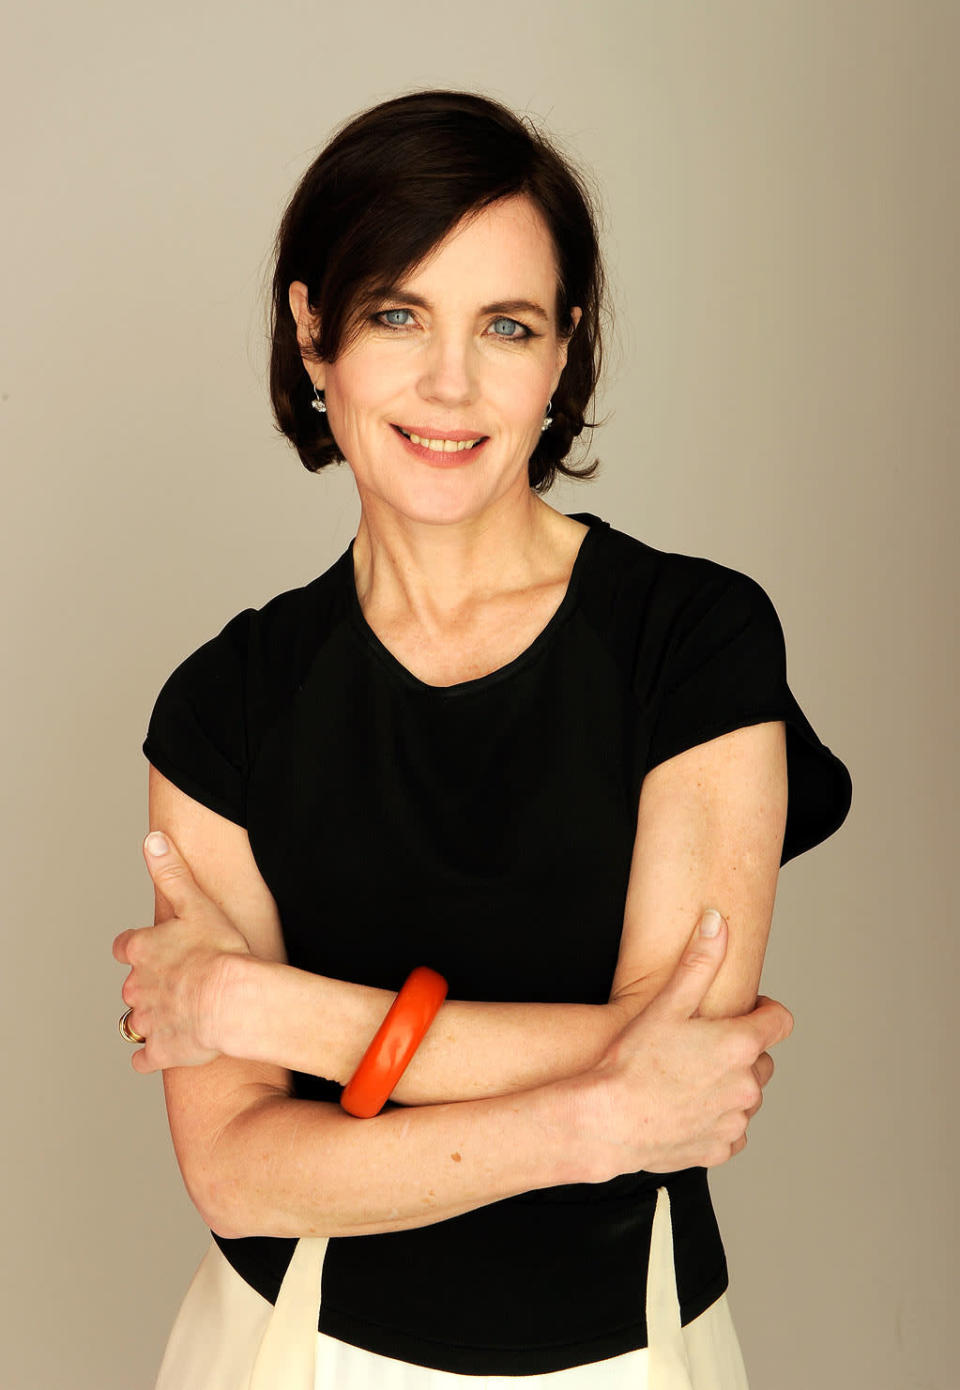 Elizabeth McGovern poses for a portrait at the 2012 Tribeca Film Festival in New York City, NY.